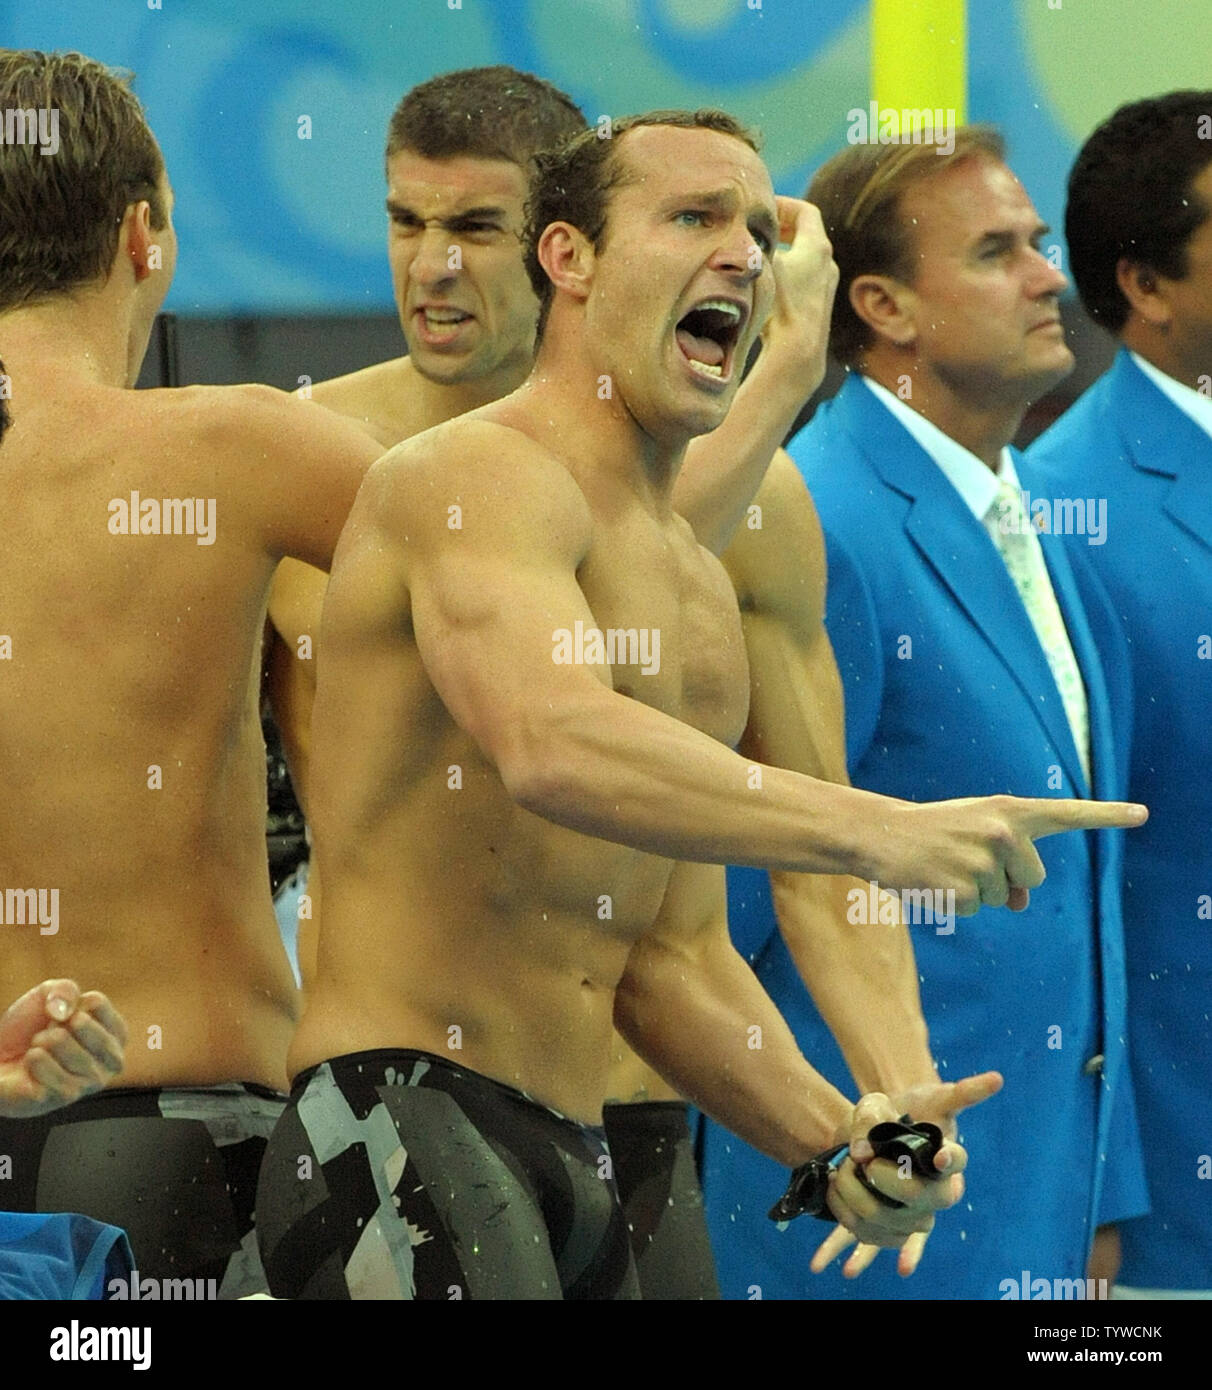 USA's Brendan Hansen cheers as team mates Michael Phelps and Aaron Peirsol embrace as the US team wins the Men's 4x100M Medley, setting a world record of 3:29.34, at the National Aquatic Center (Water Cube) during the 2008 Summer Olympics in Beijing, China, on August 17, 2008.  Phelps set the world record for medals in a single Olympics with 8, passing Mark Spitz.    (UPI Photo/Roger L. Wollenberg) Stock Photo